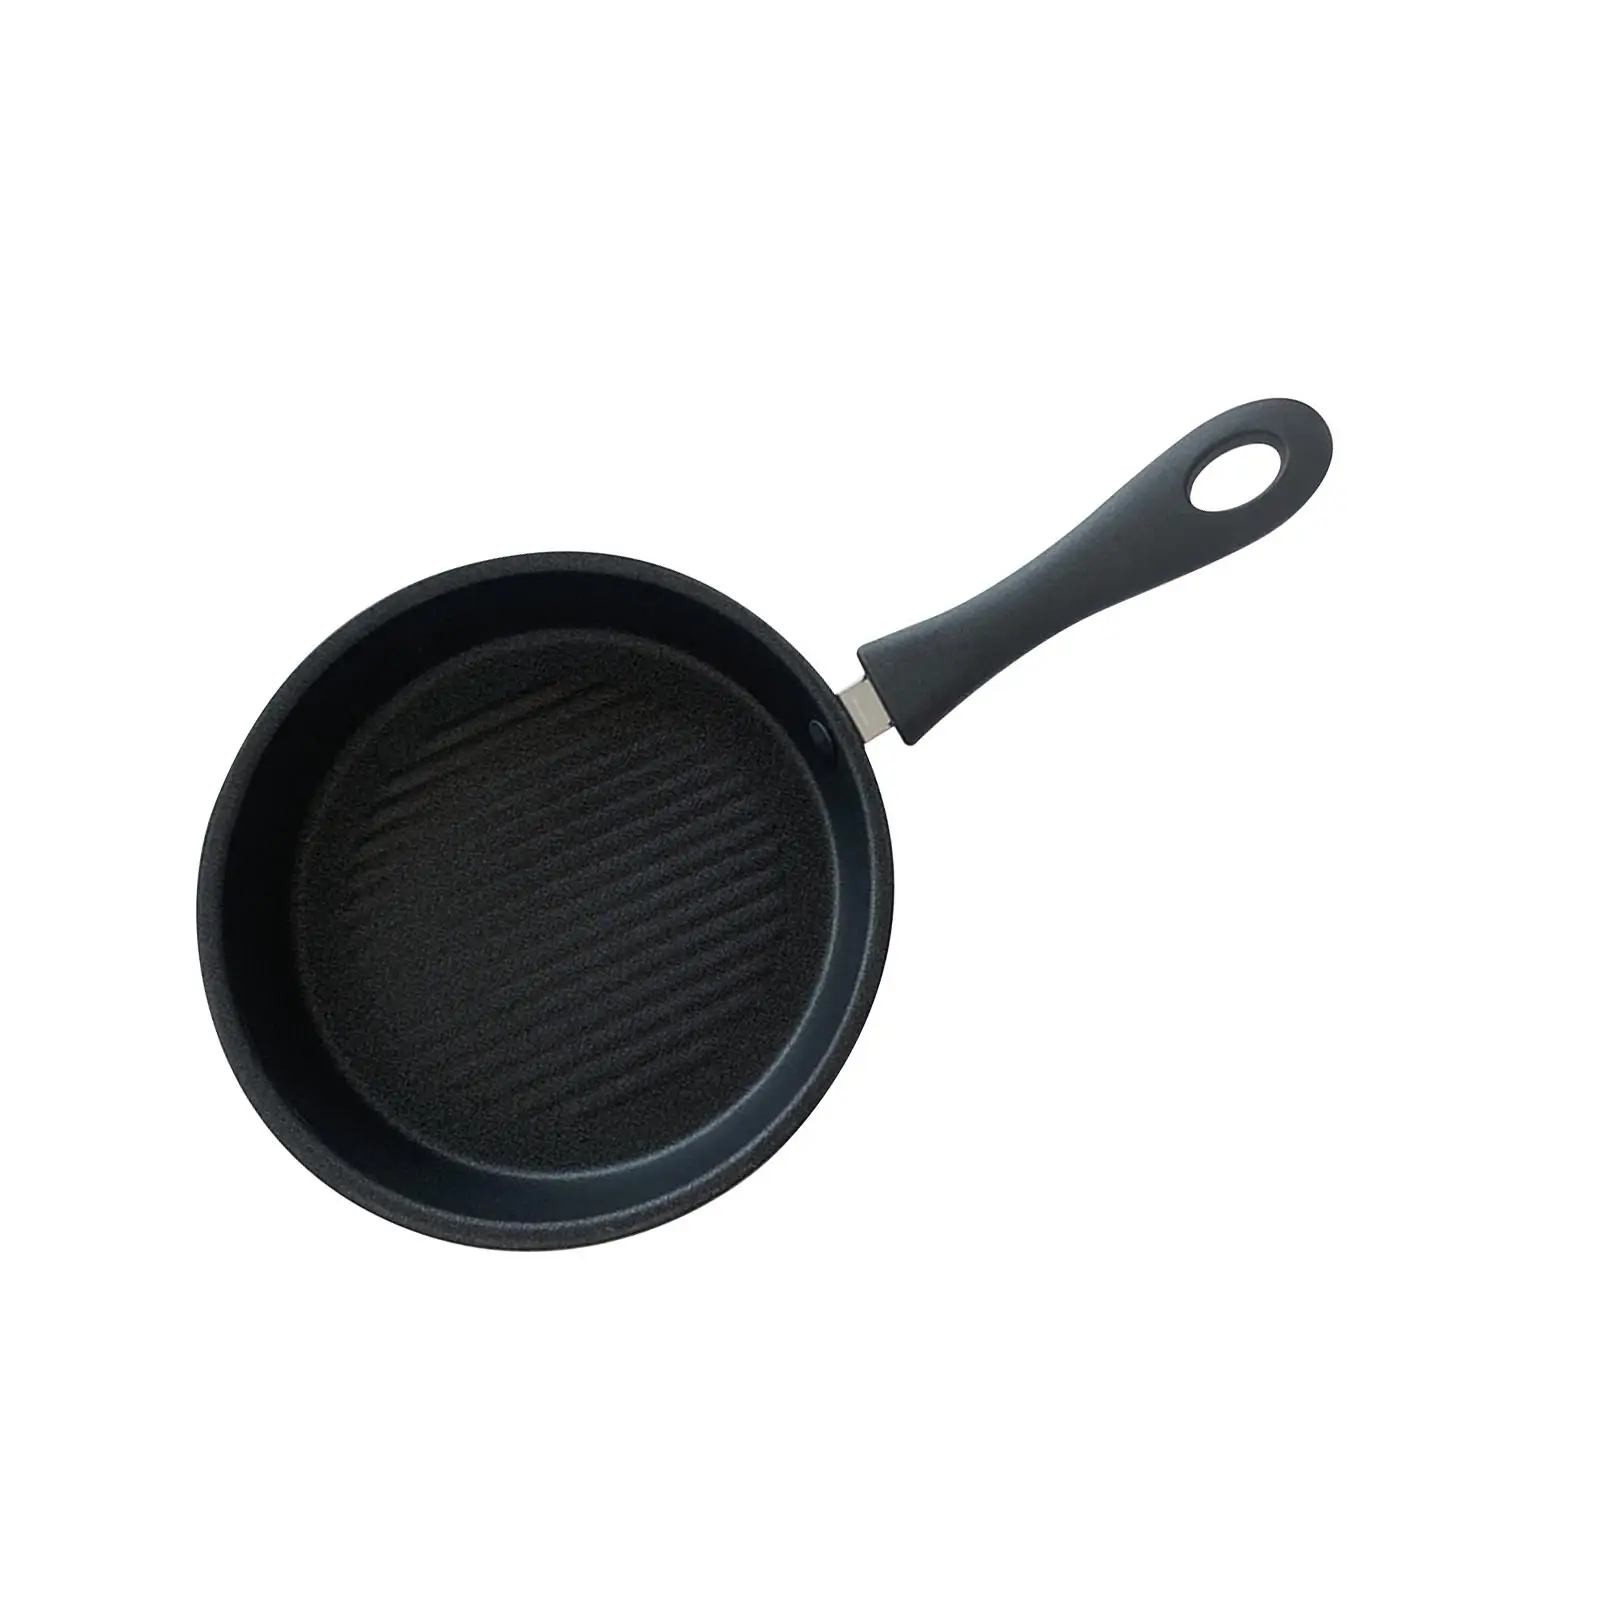 Grill Pan Nonstick Surface Frying Cookware Stripe Frying Pan Steak Pan Griddle Pan for Steak Meats Vegetables Picnic Camping